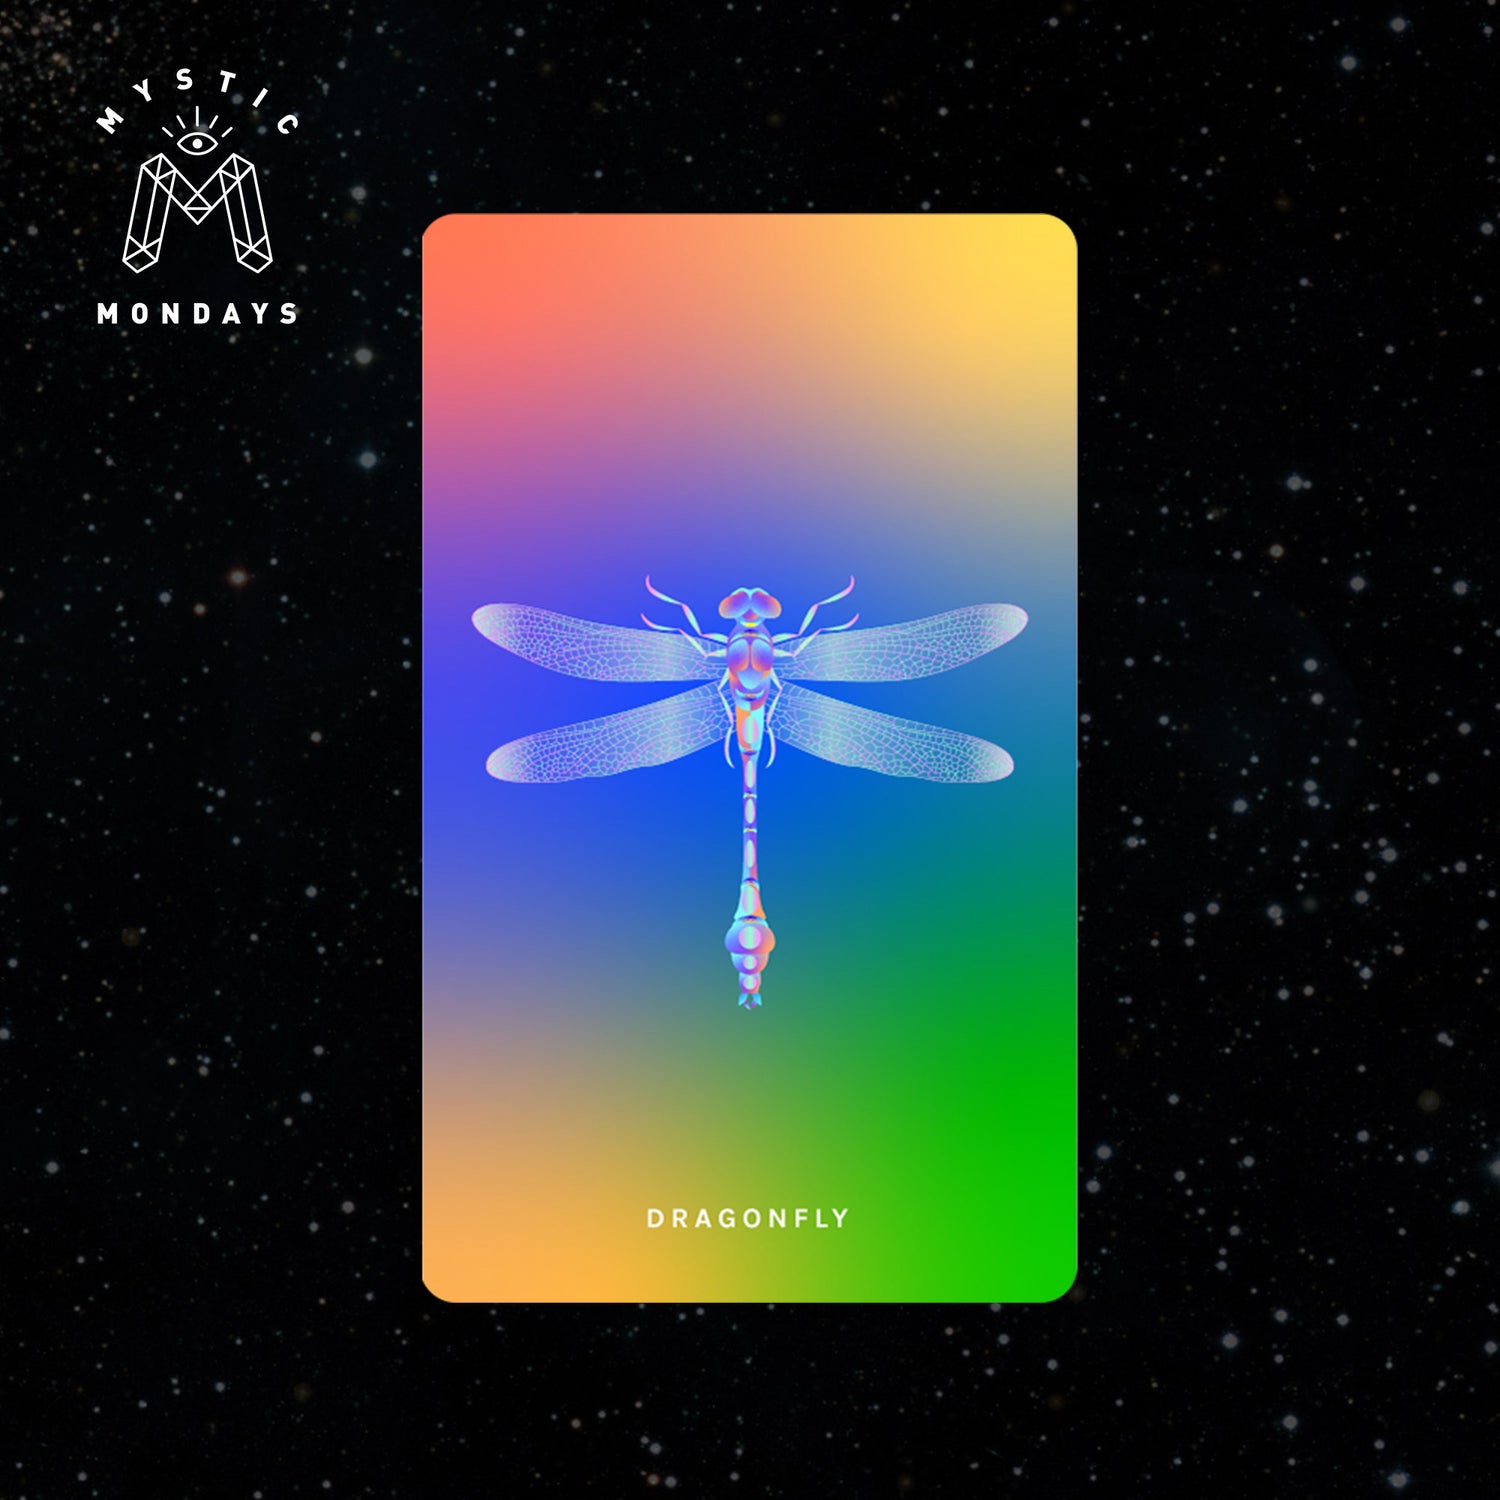 Dragonfly Cosmic Creatures Card Cheat Sheet Reference Guide